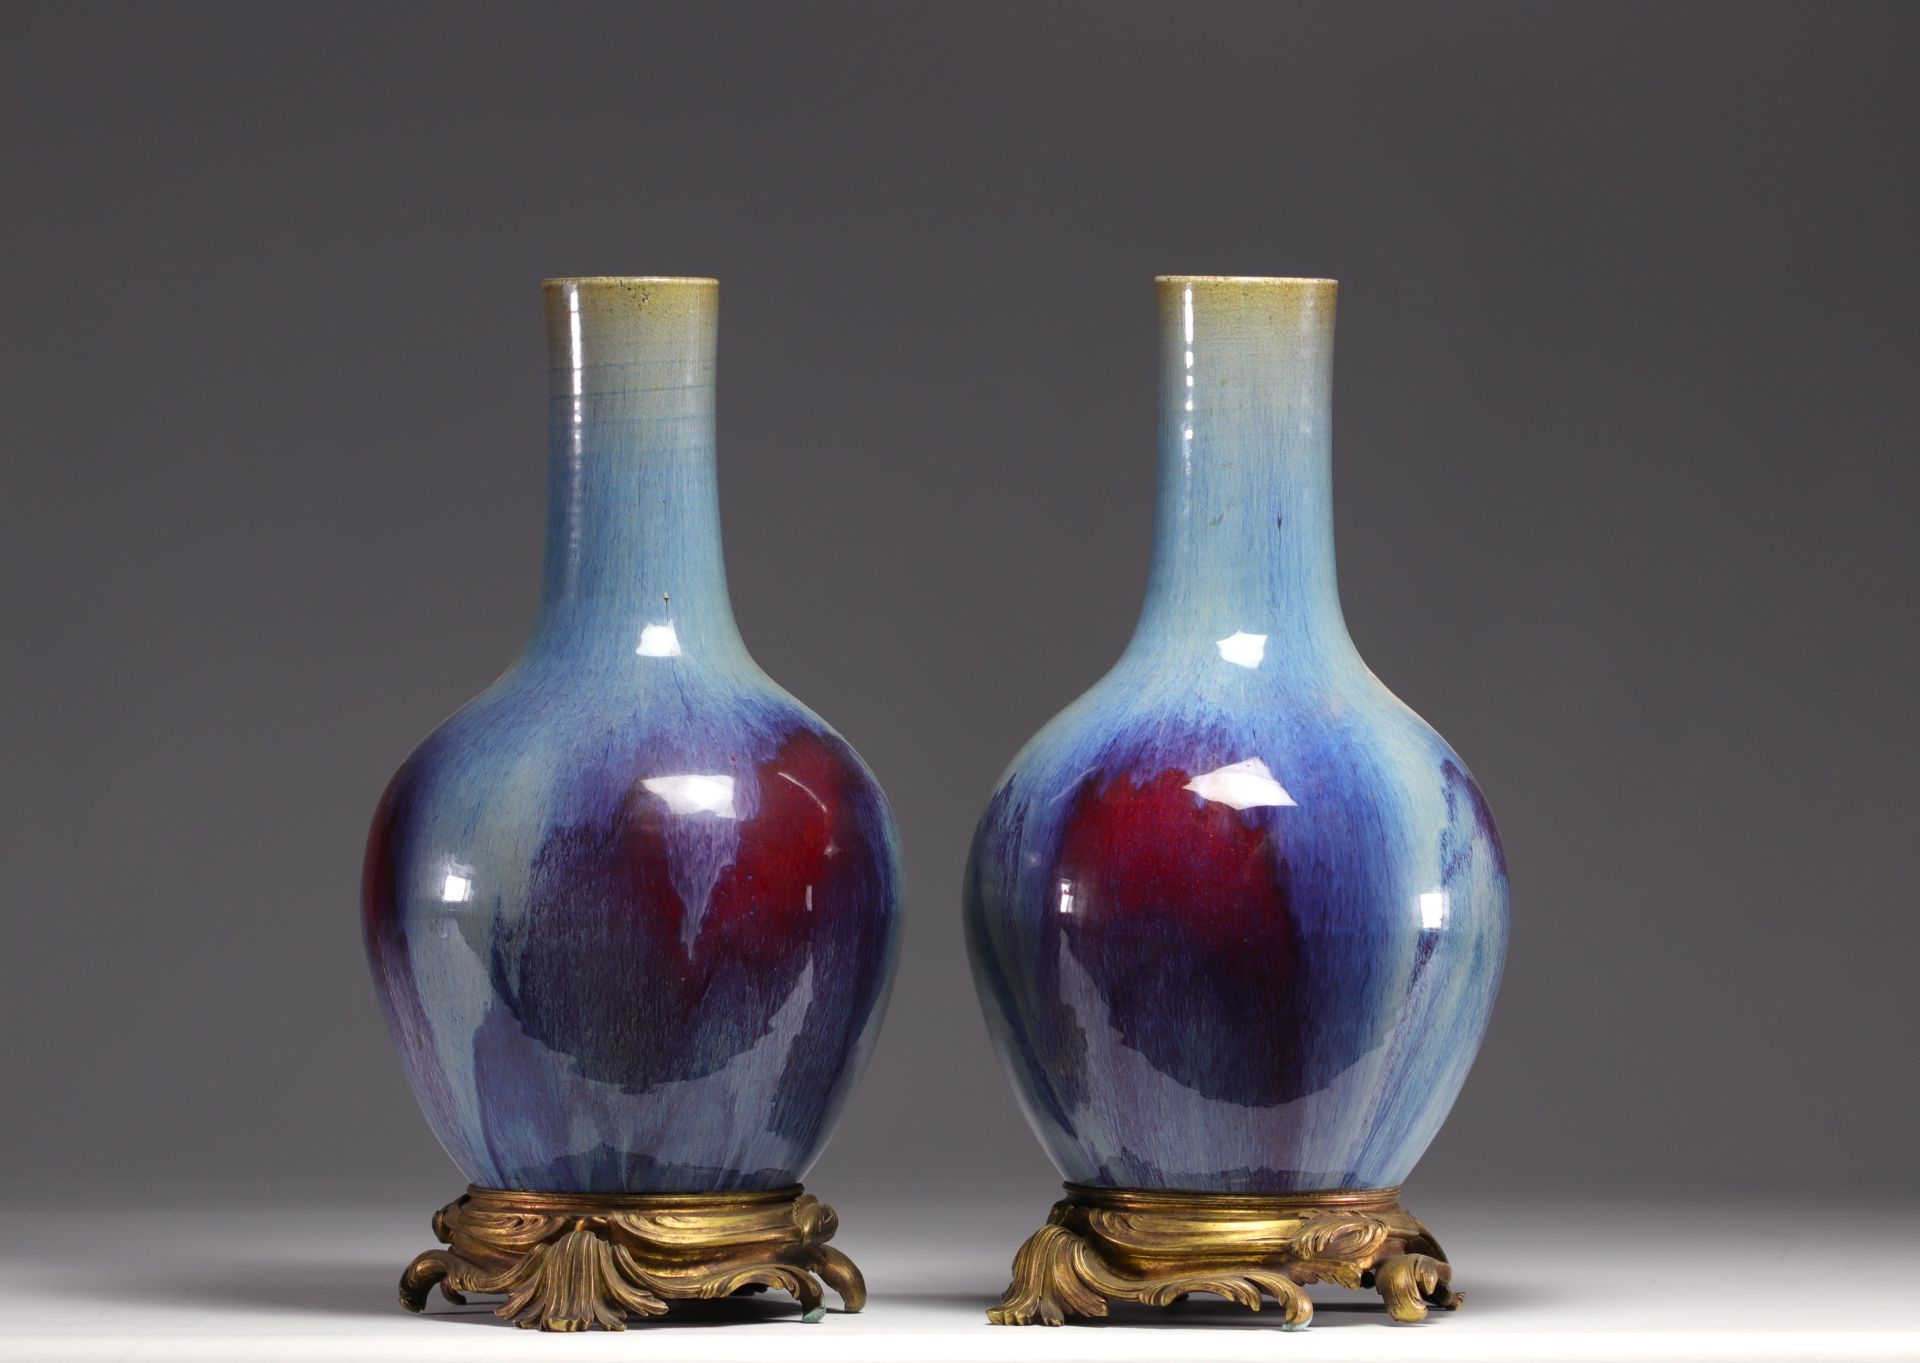 Rare pair of porcelain vases with flamed glaze mounted on bronze from 18th century - Bild 3 aus 5